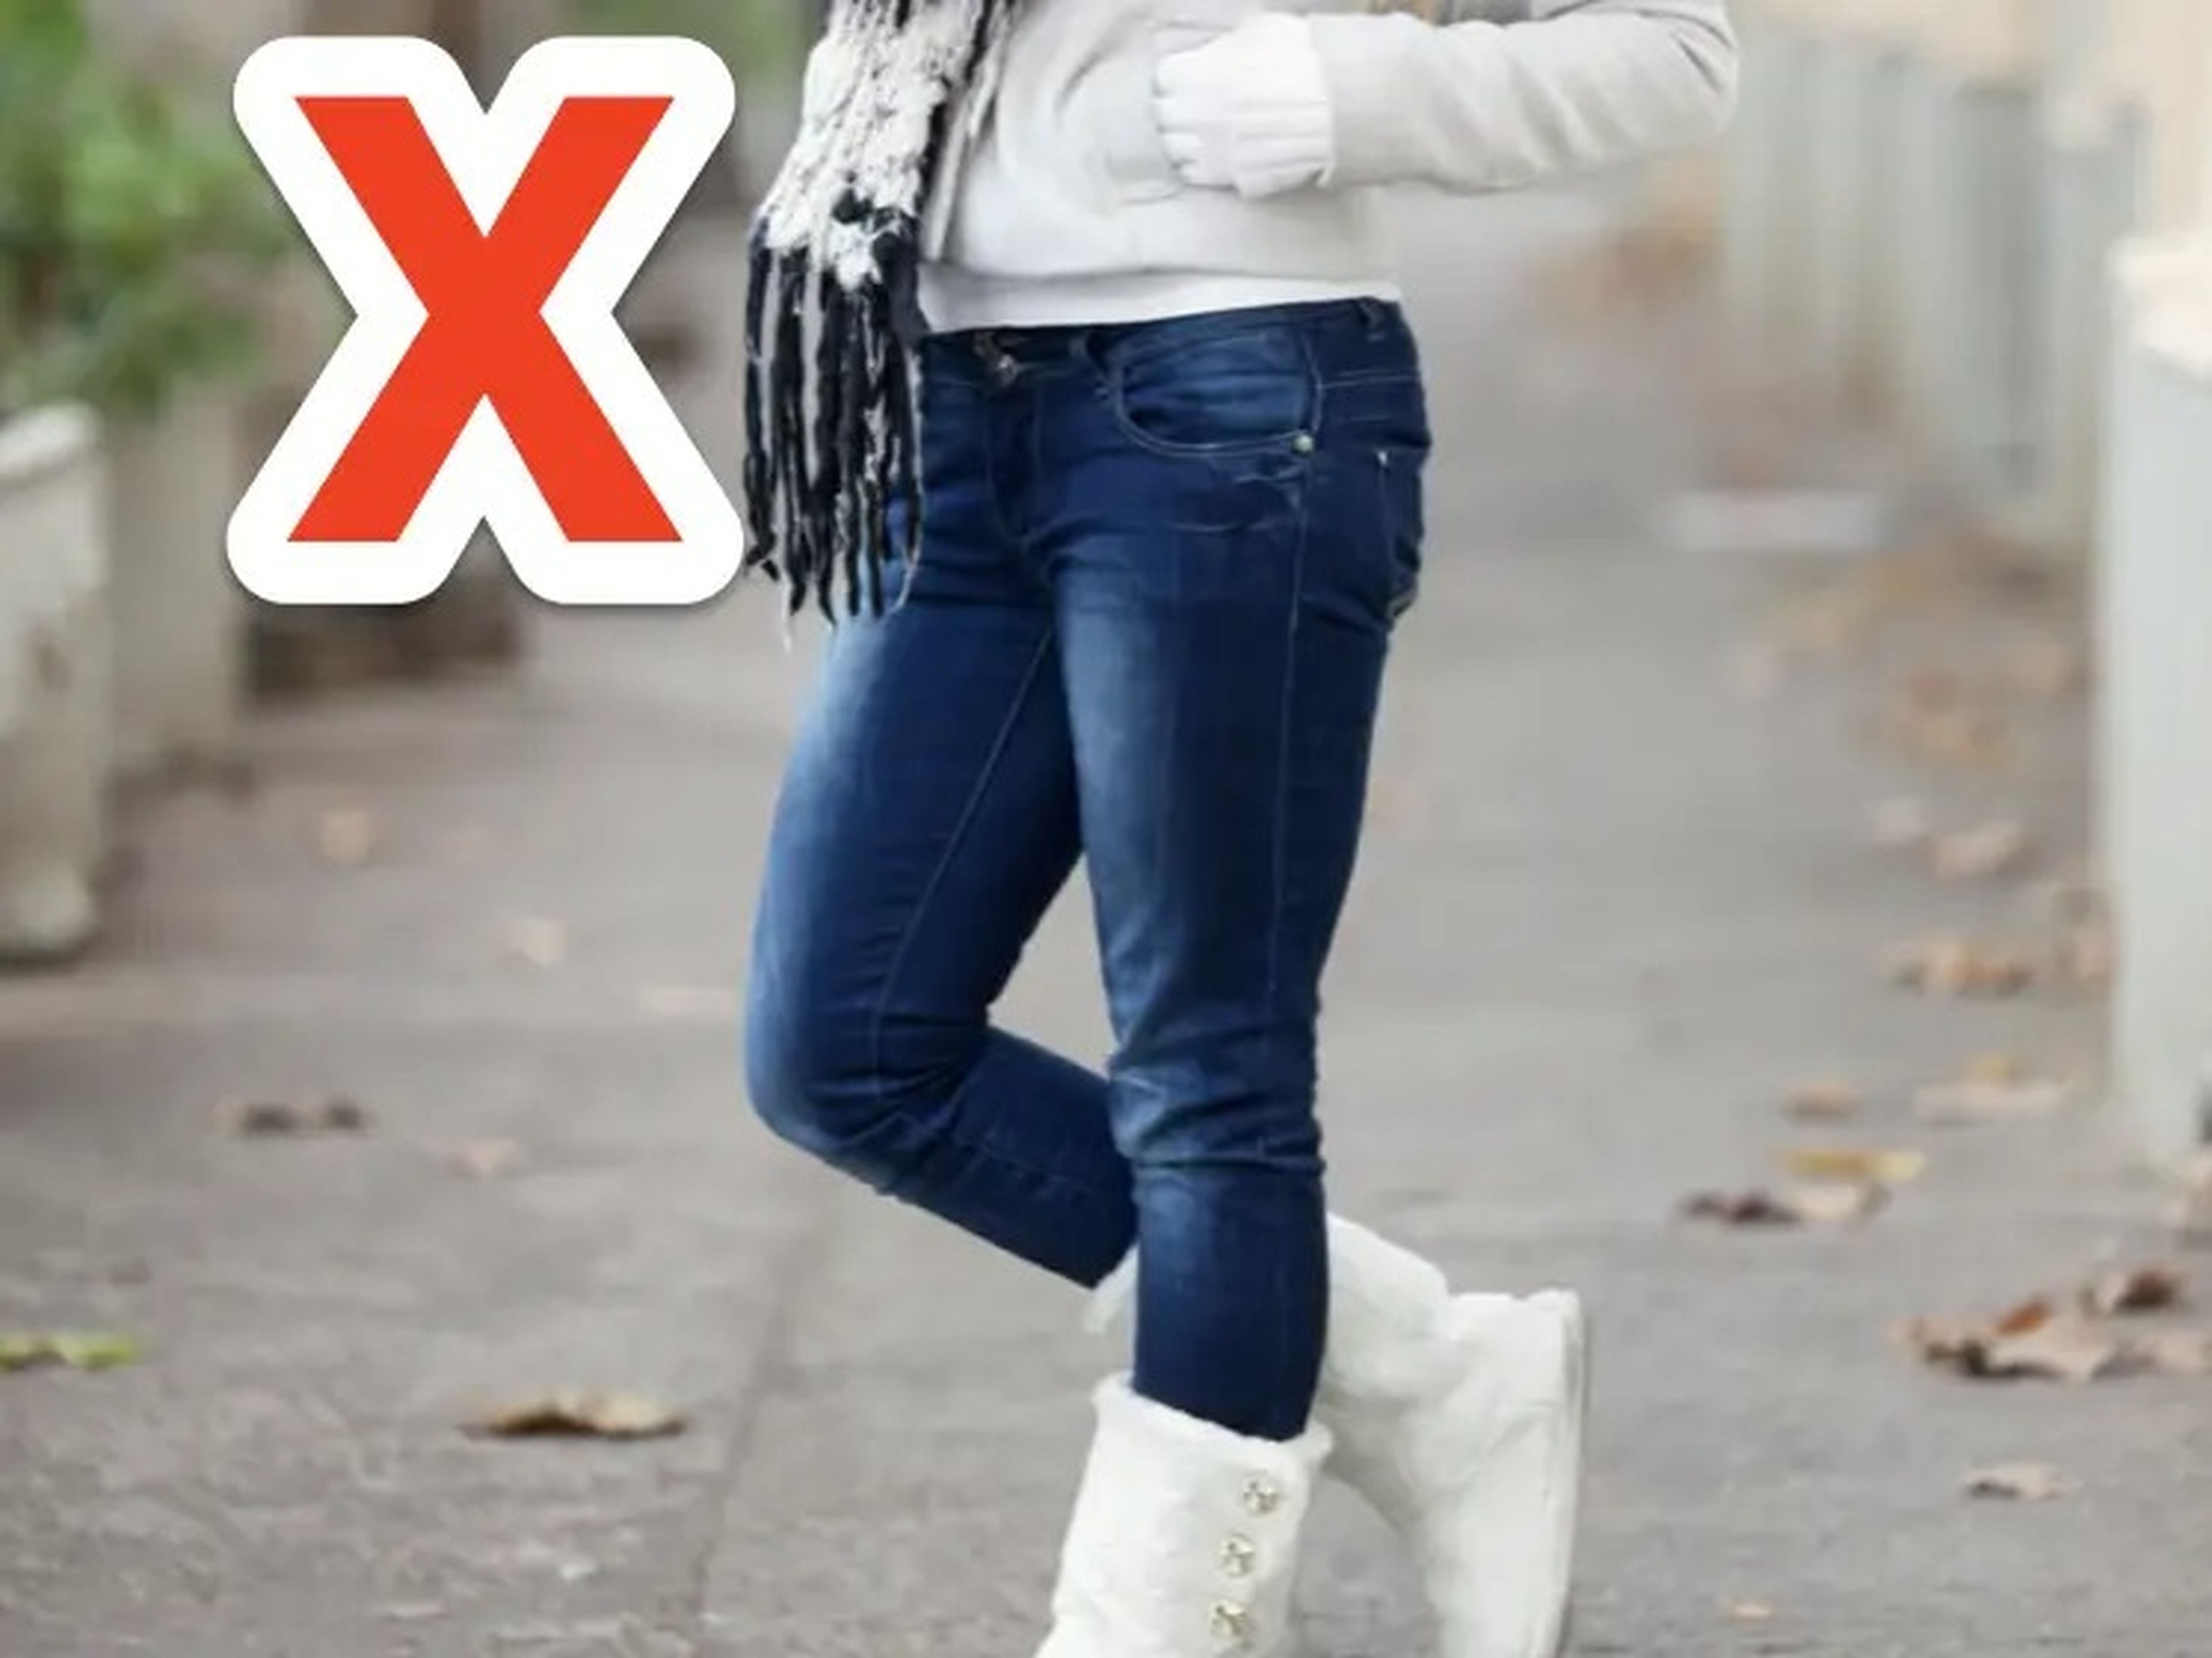 red x over woman wearing low-rise skinny jeans, a cream jacket, and white furry boots